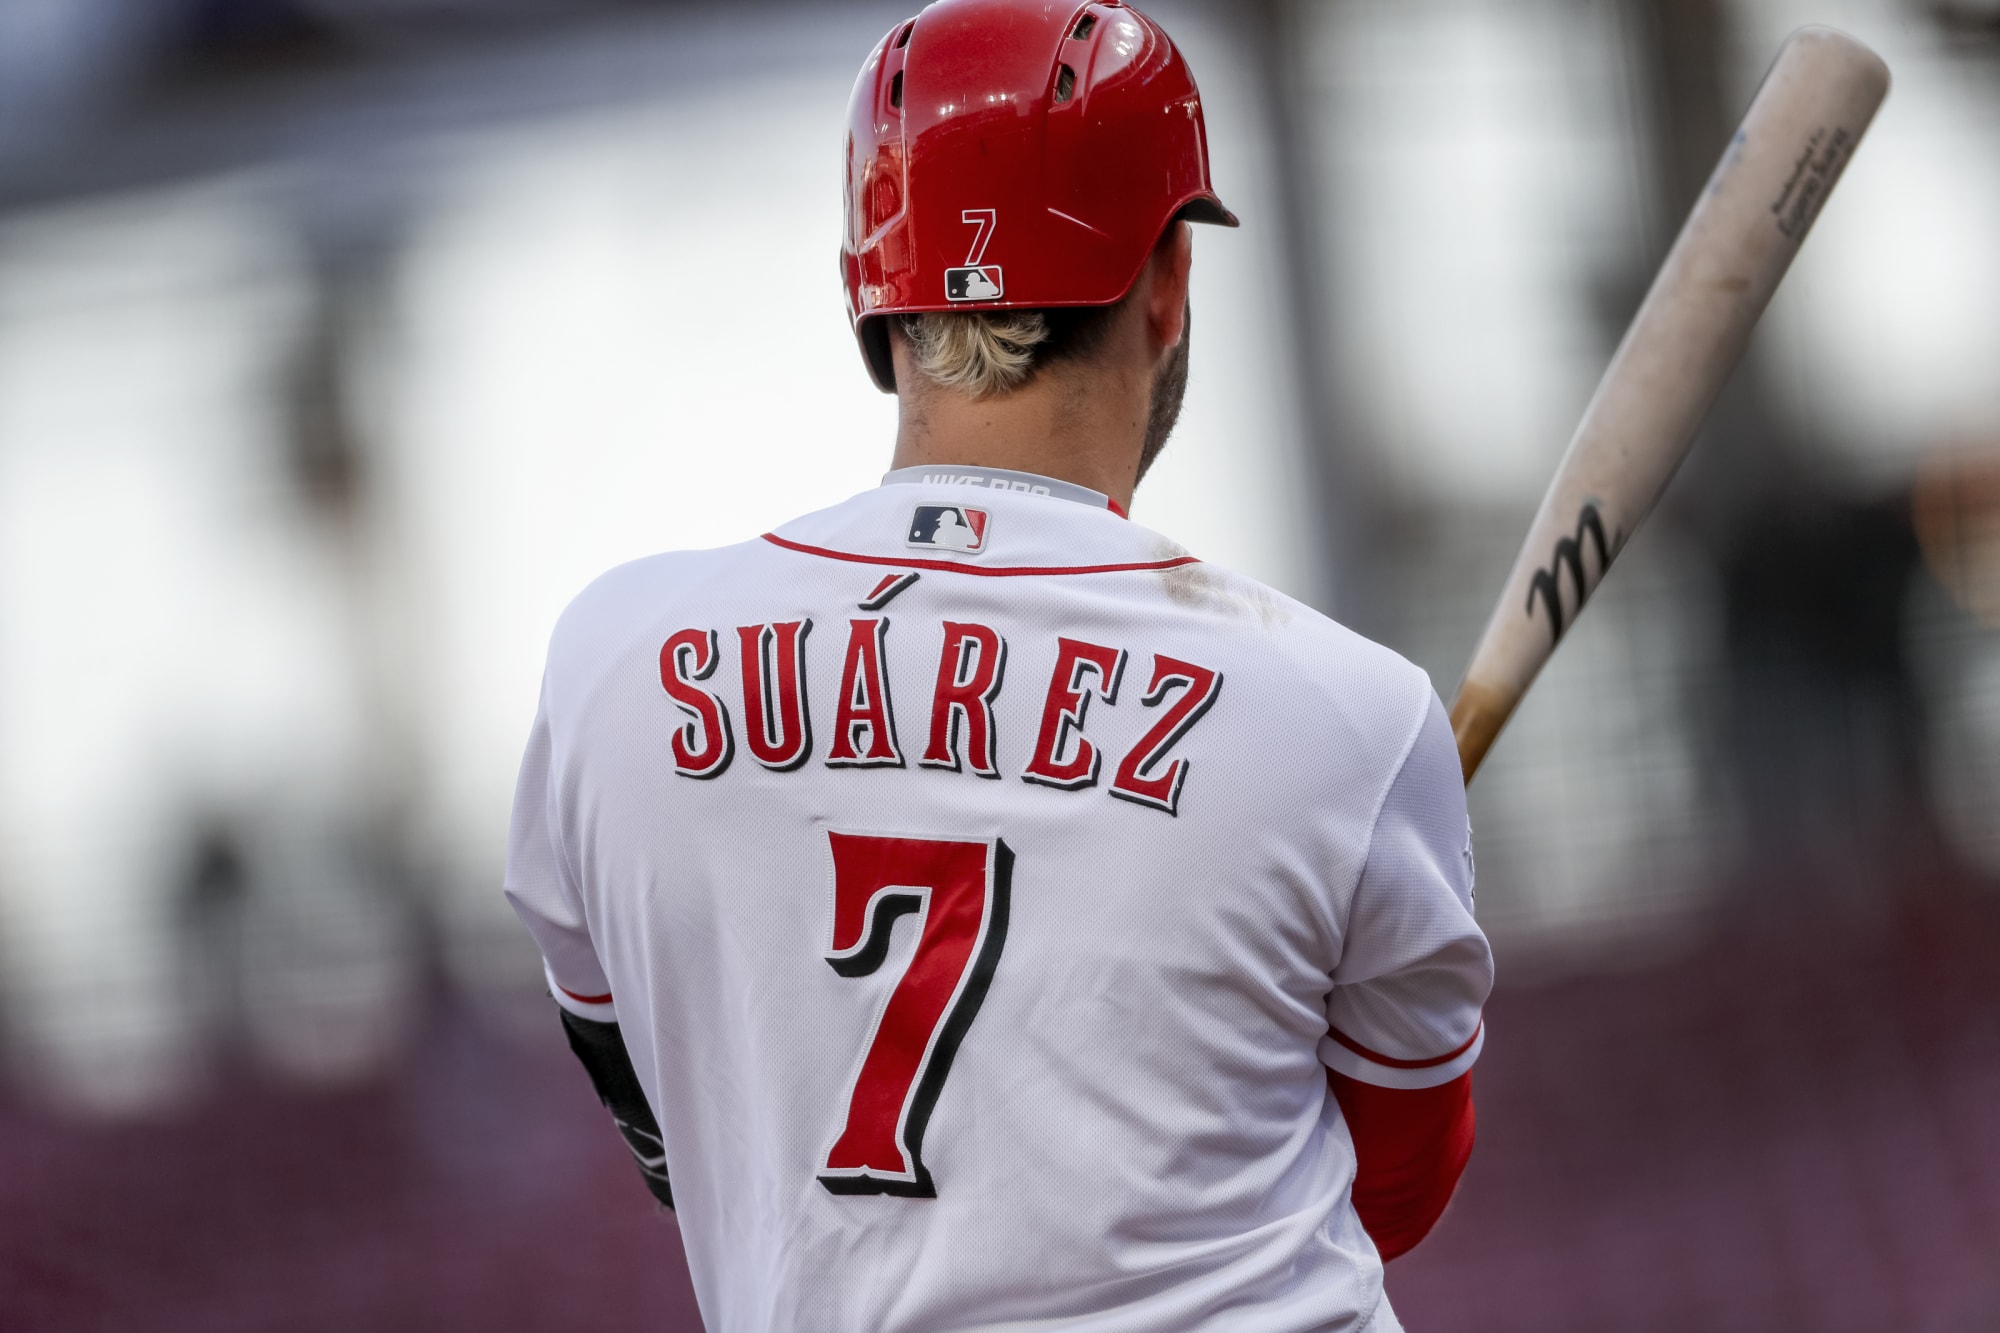 Cincinnati Reds Who was the best player in team history to wear No. 7?